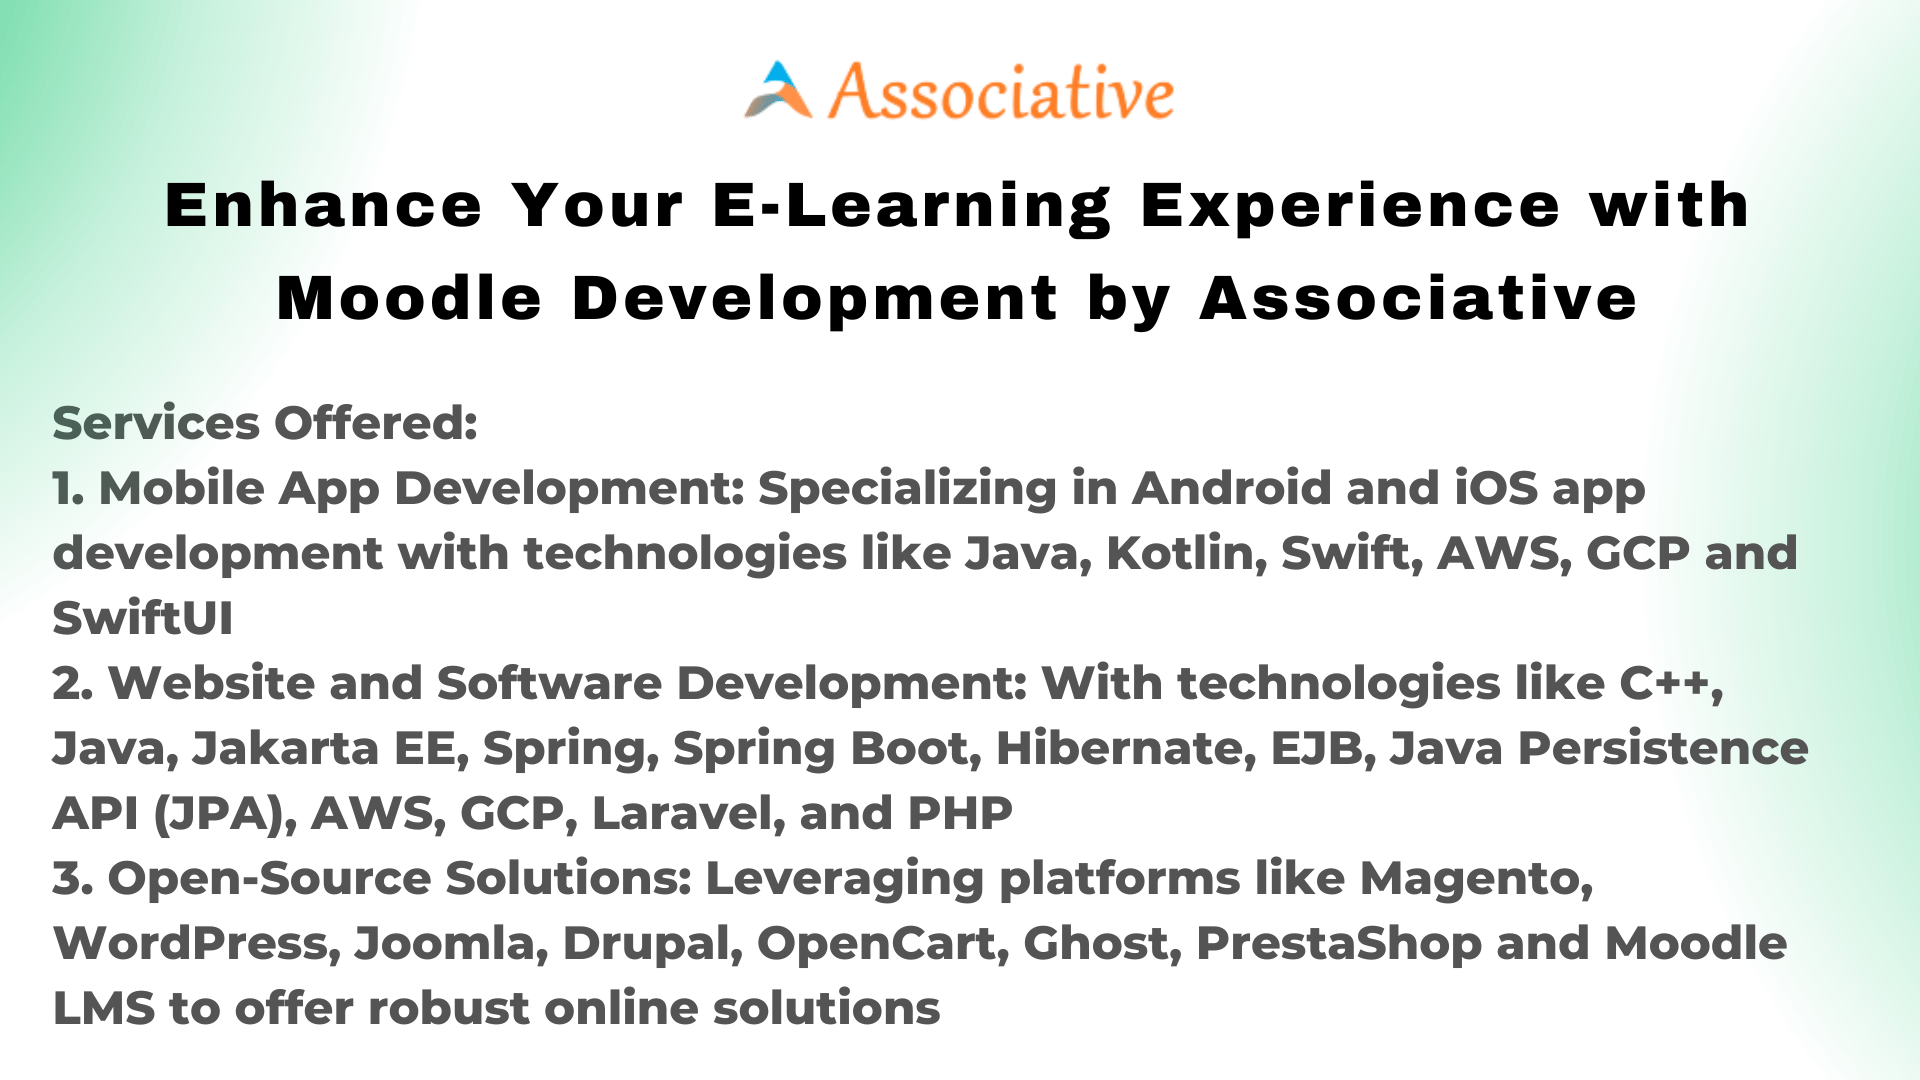 Enhance Your E-Learning Experience with Moodle Development by Associative